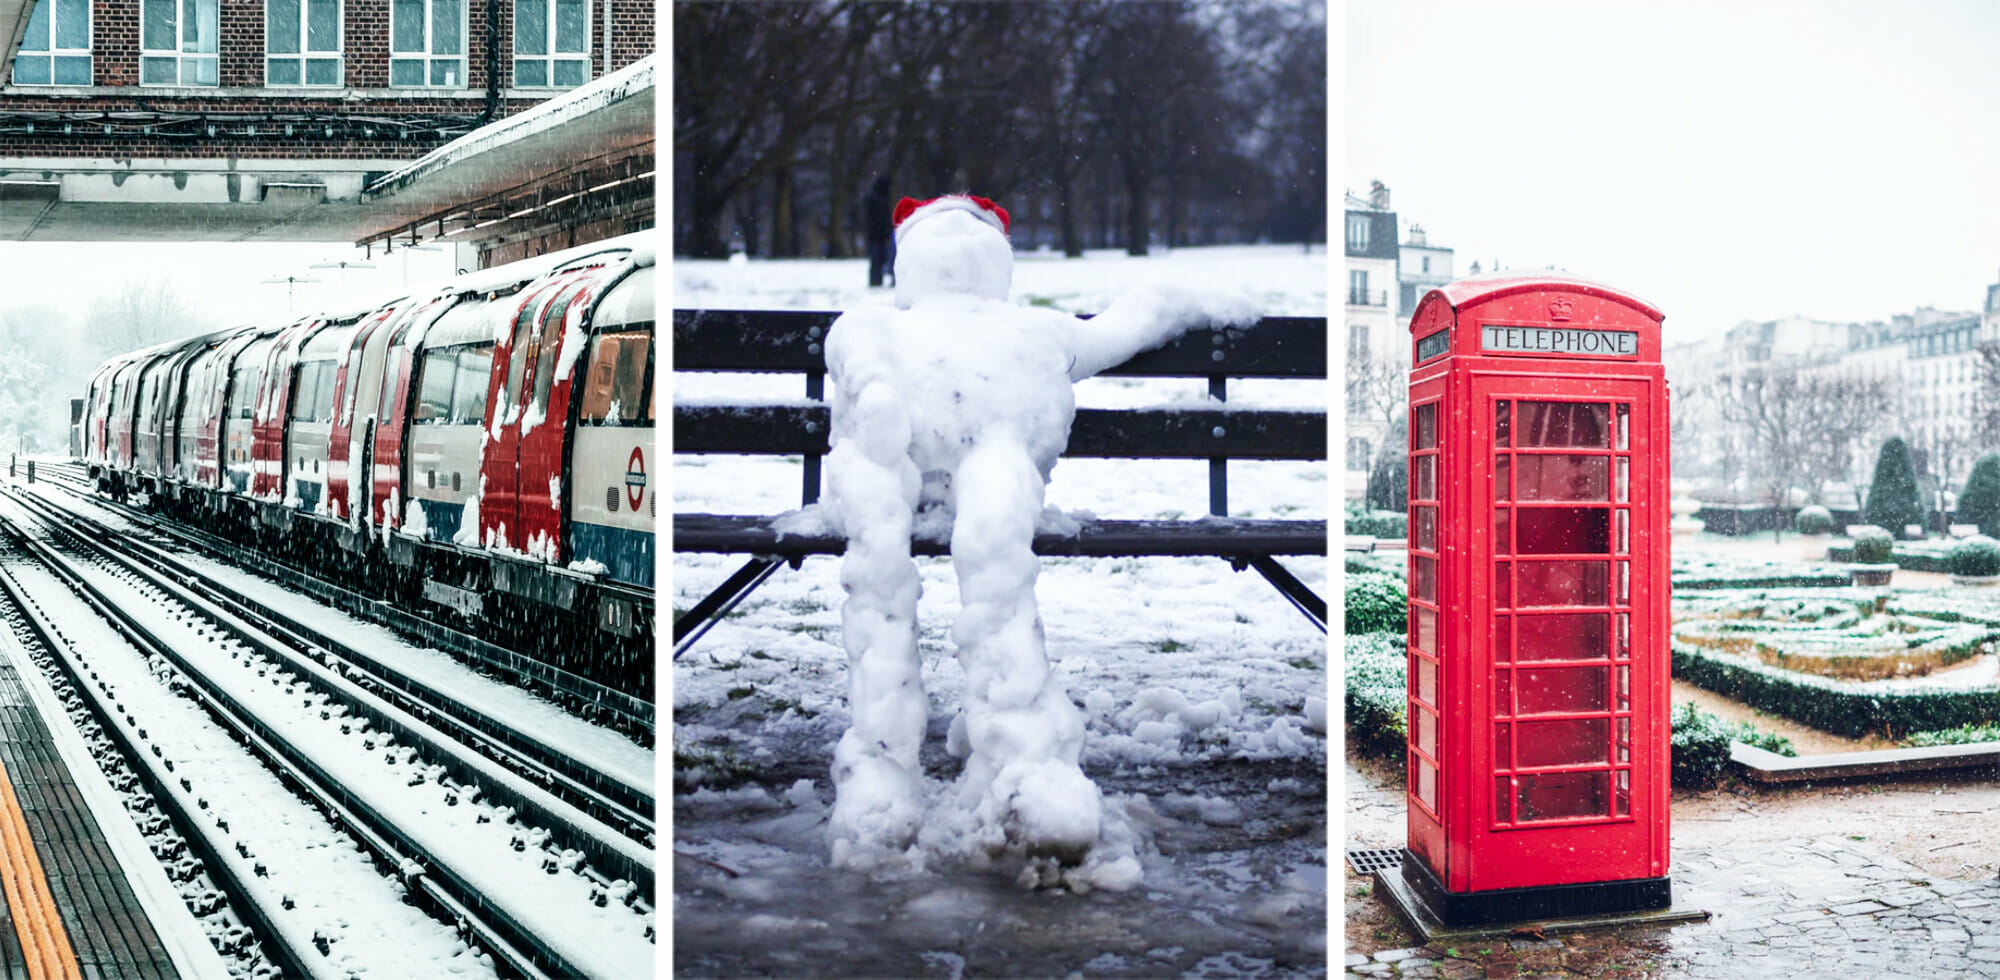 Snow Chic vs. Snow Freak: A Guide to Looking Hot on the Snow